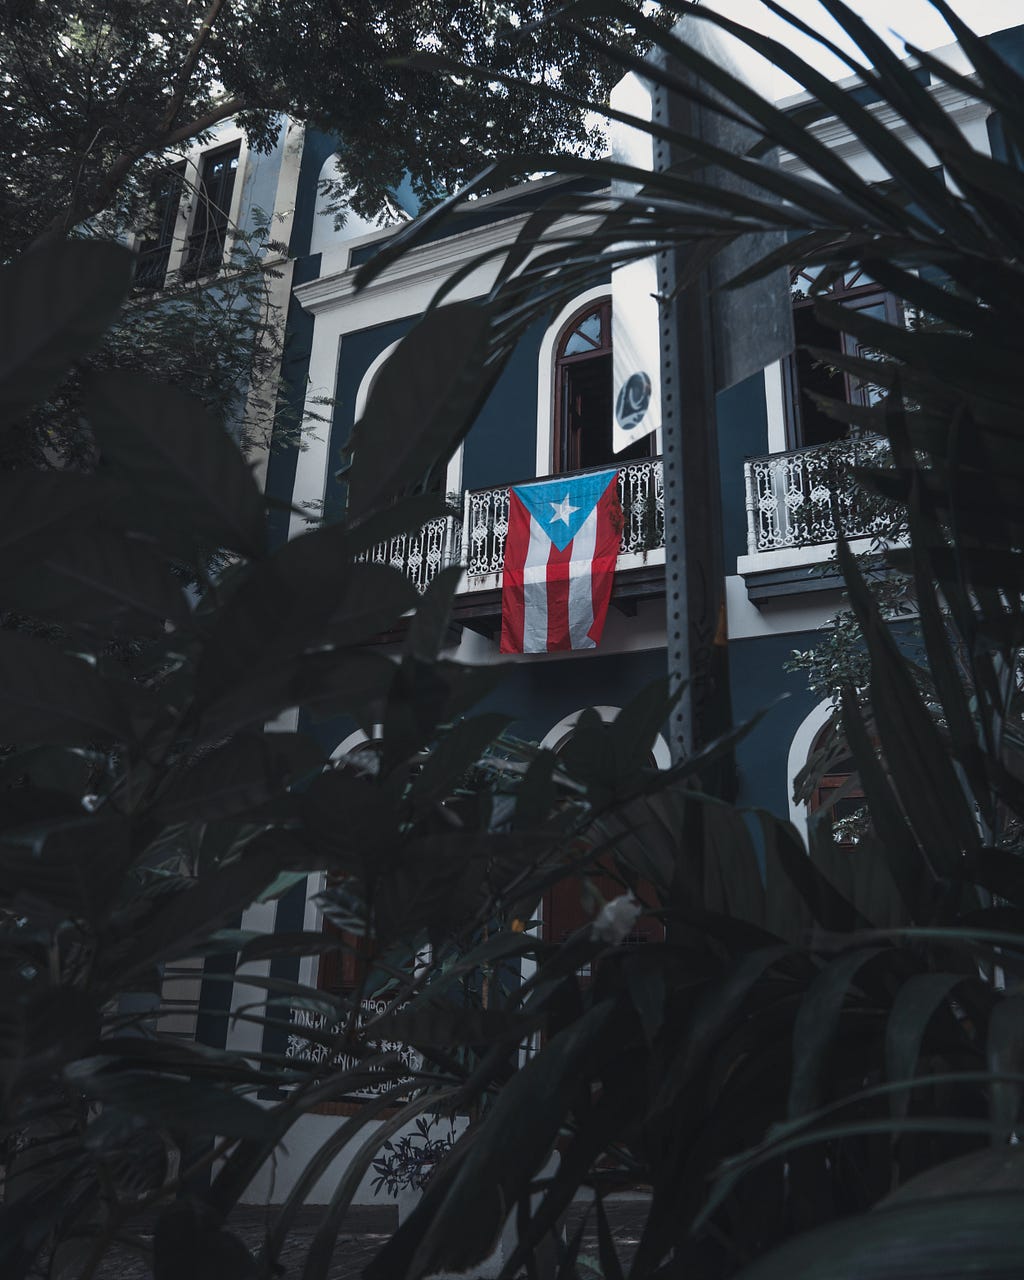 Dark, lush vegetation fills the bottom half of the image. In the background a Puerto Rican flag hangs from a second story balcony of a white building in San Juan.